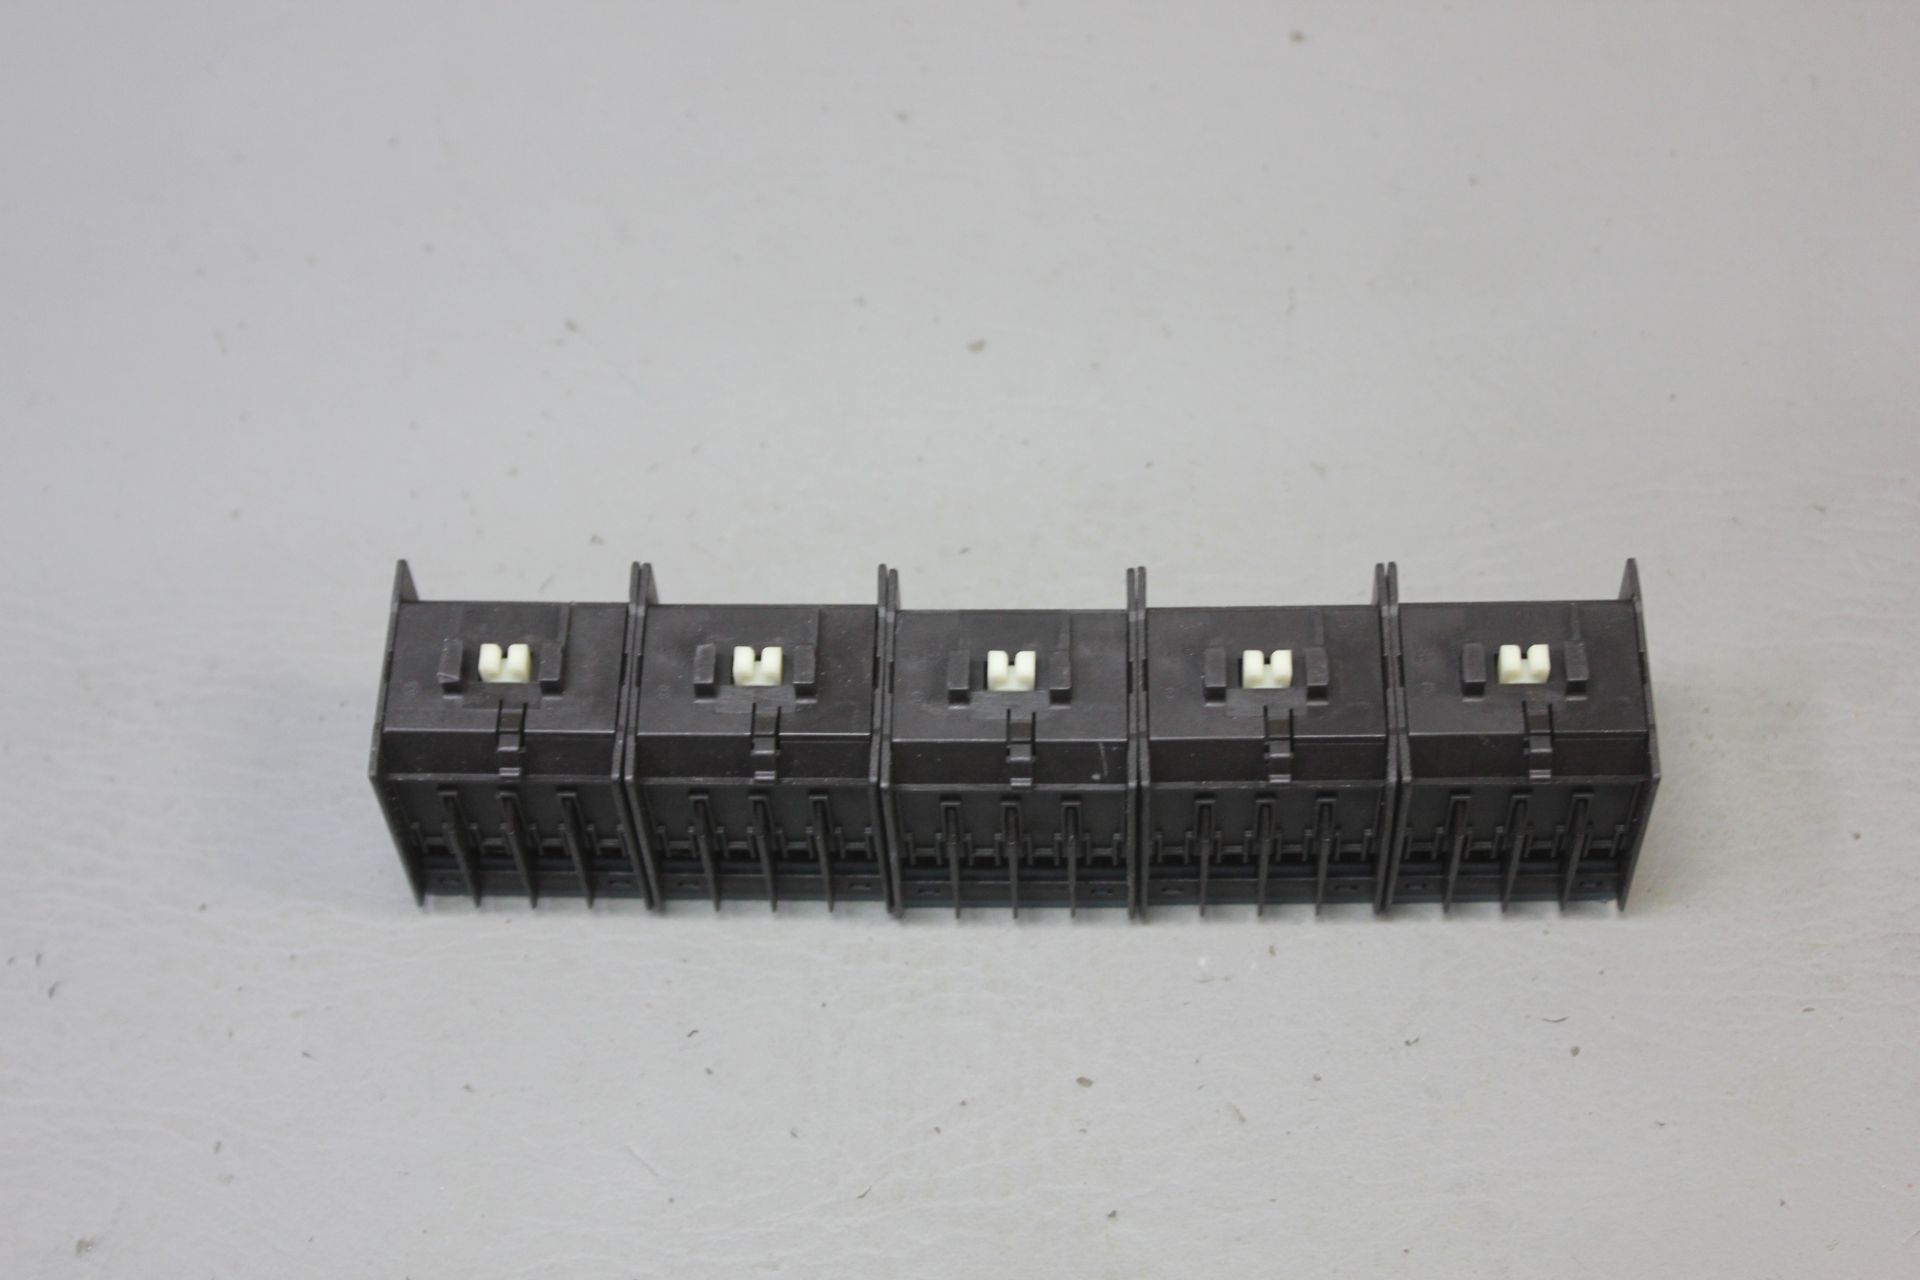 LOT OF 5 UNUSED SIEMENS CONTACTOR AUX SWITCHES - Image 6 of 8